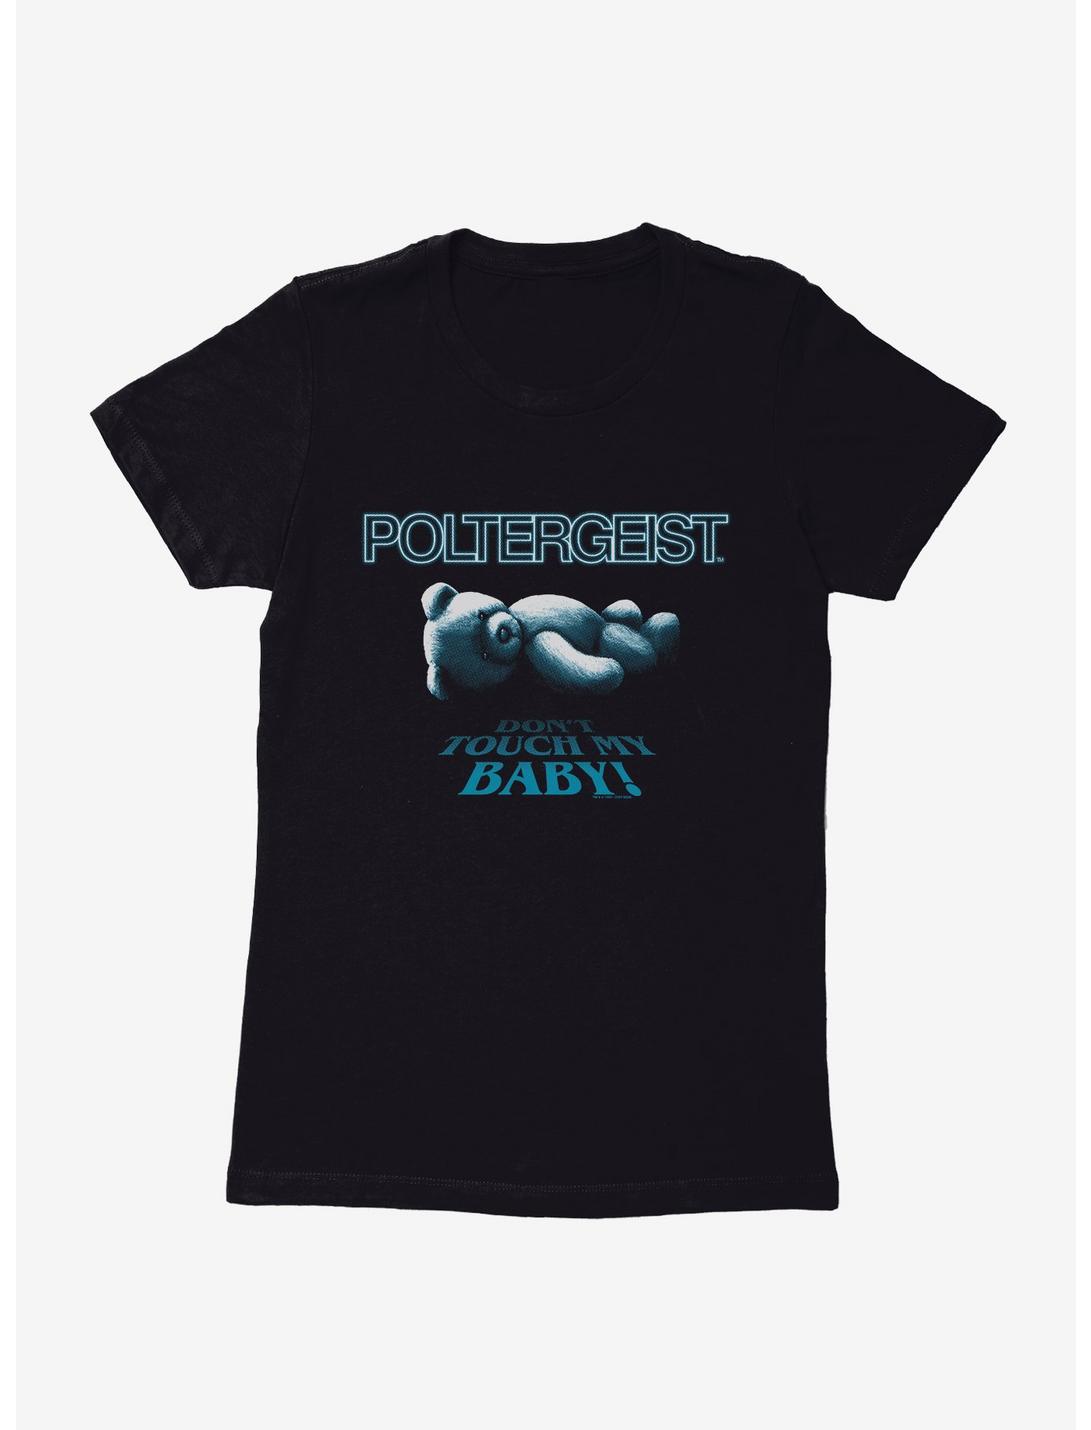 Poltergeist Don't Touch My Baby! Womens T-Shirt, BLACK, hi-res